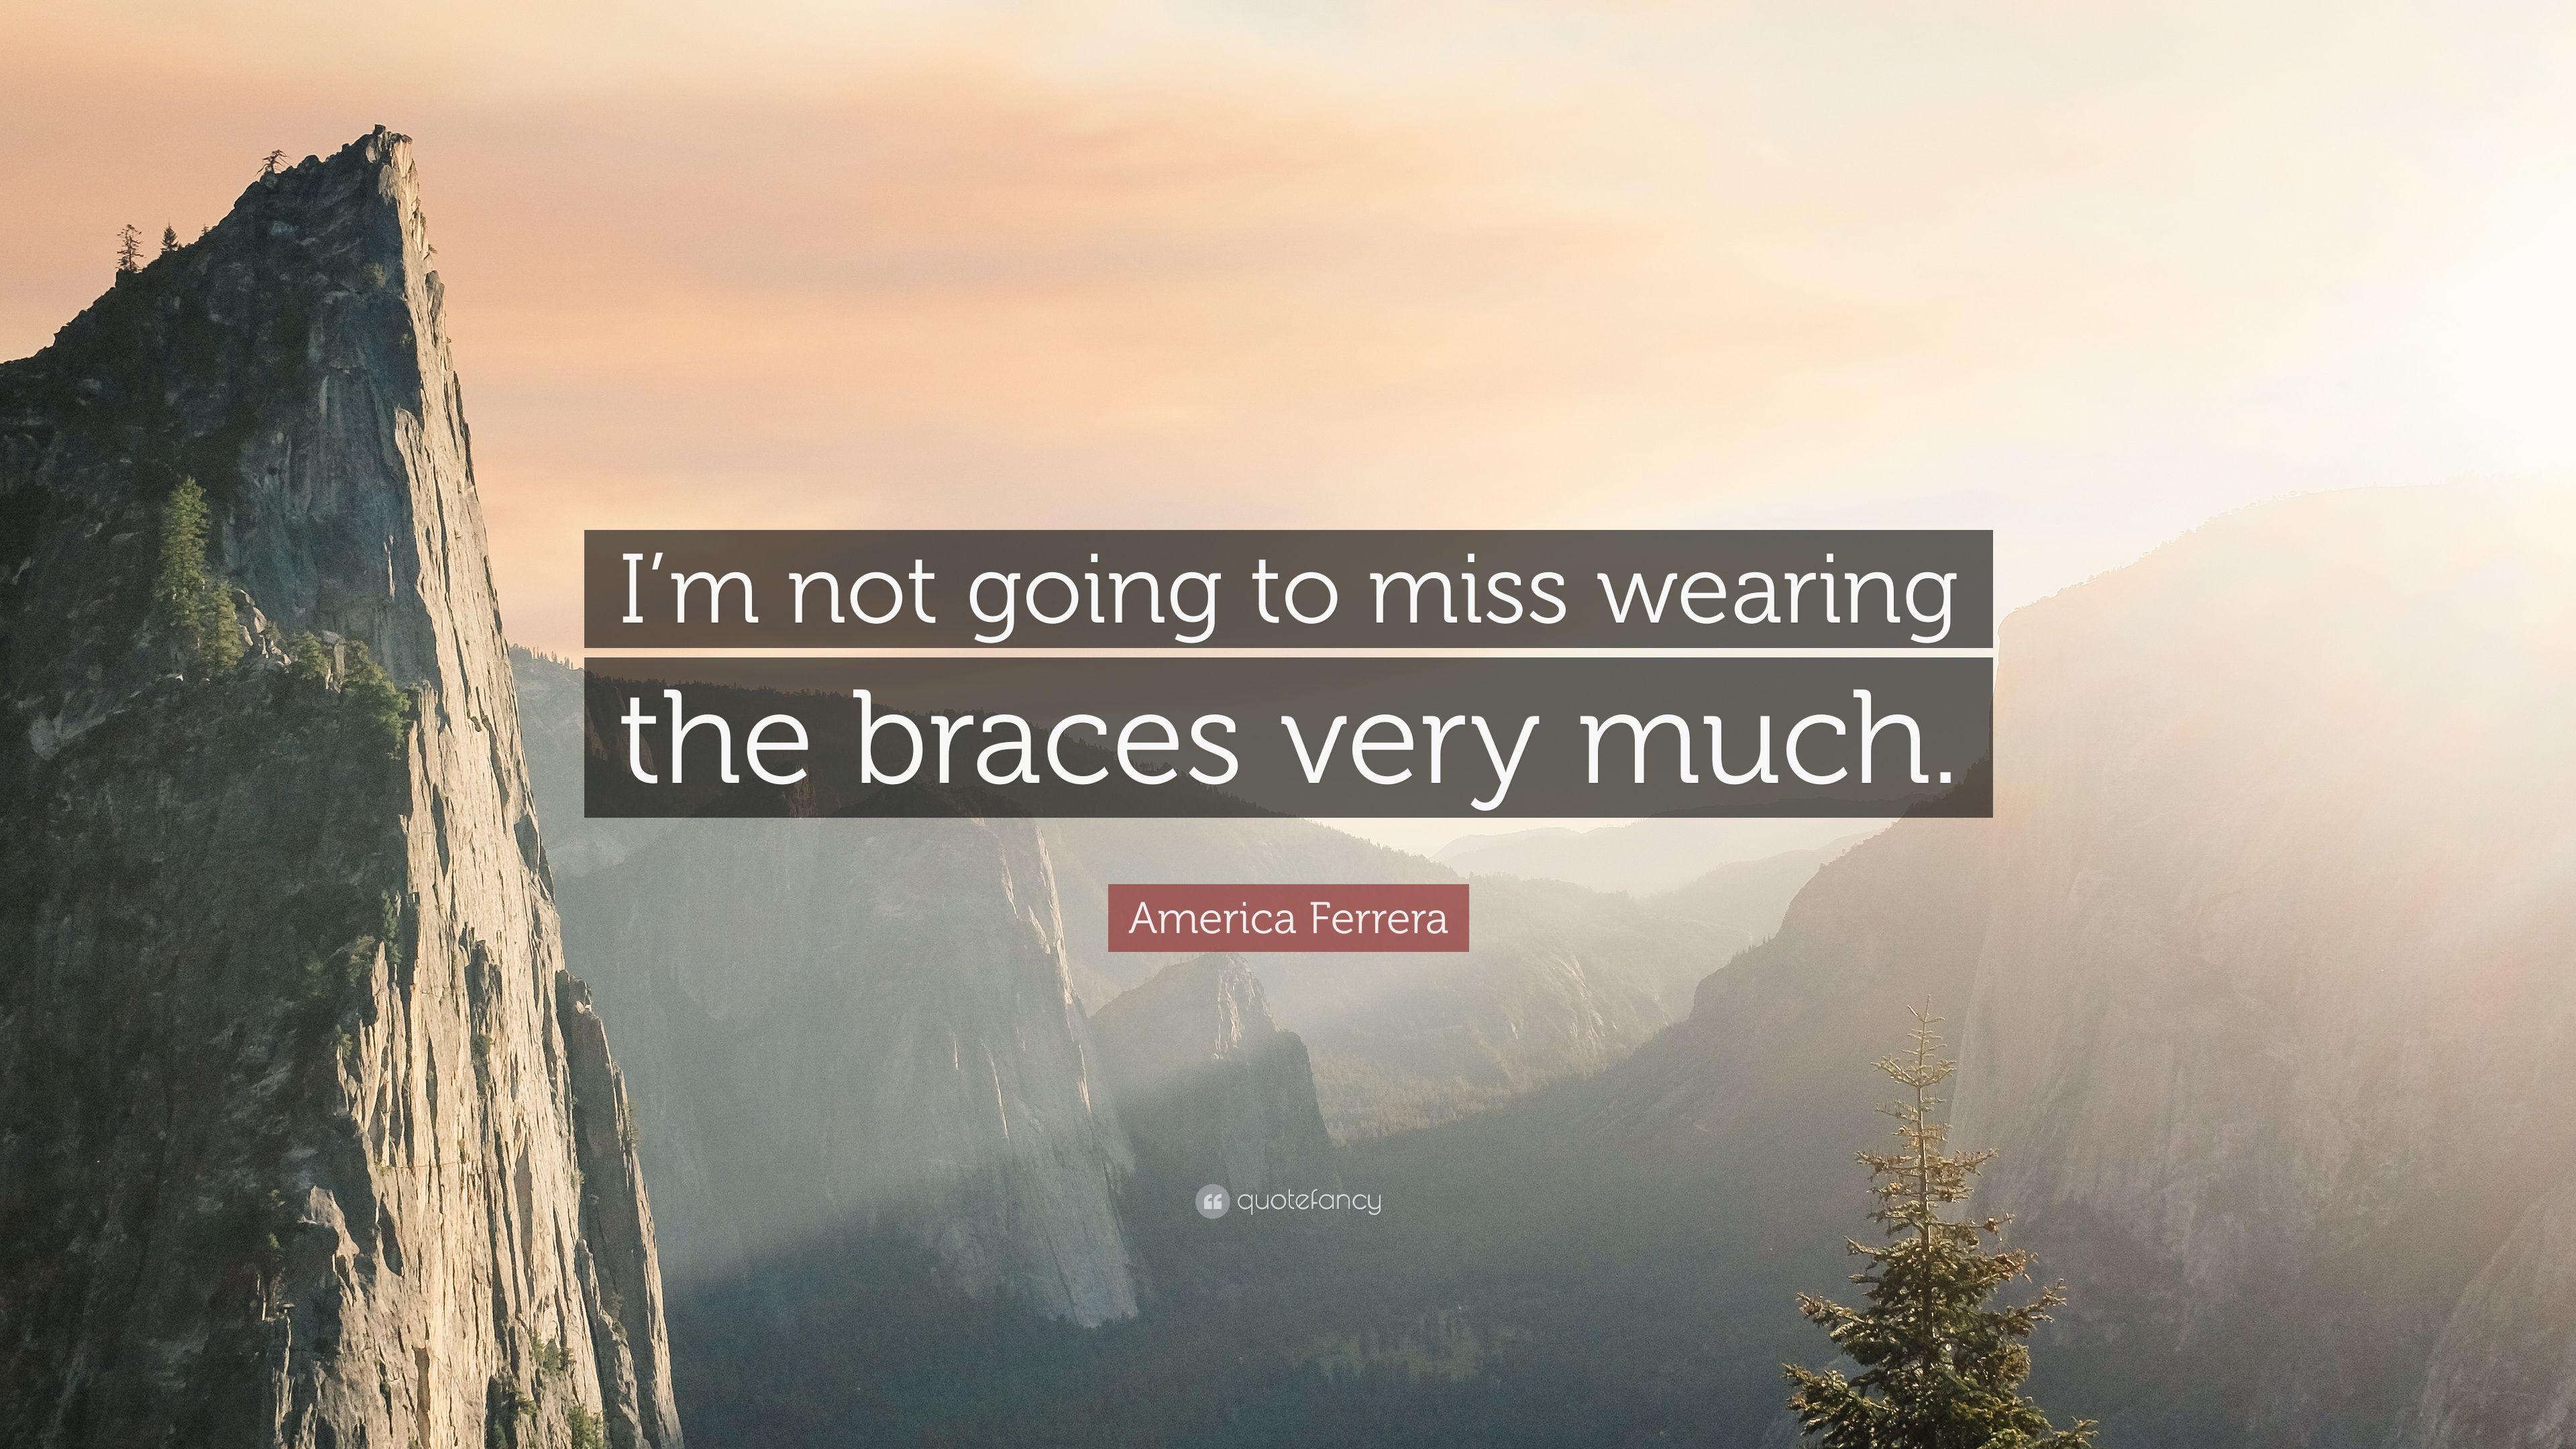 America Ferrera Quote: “I'm not going to miss wearing the braces